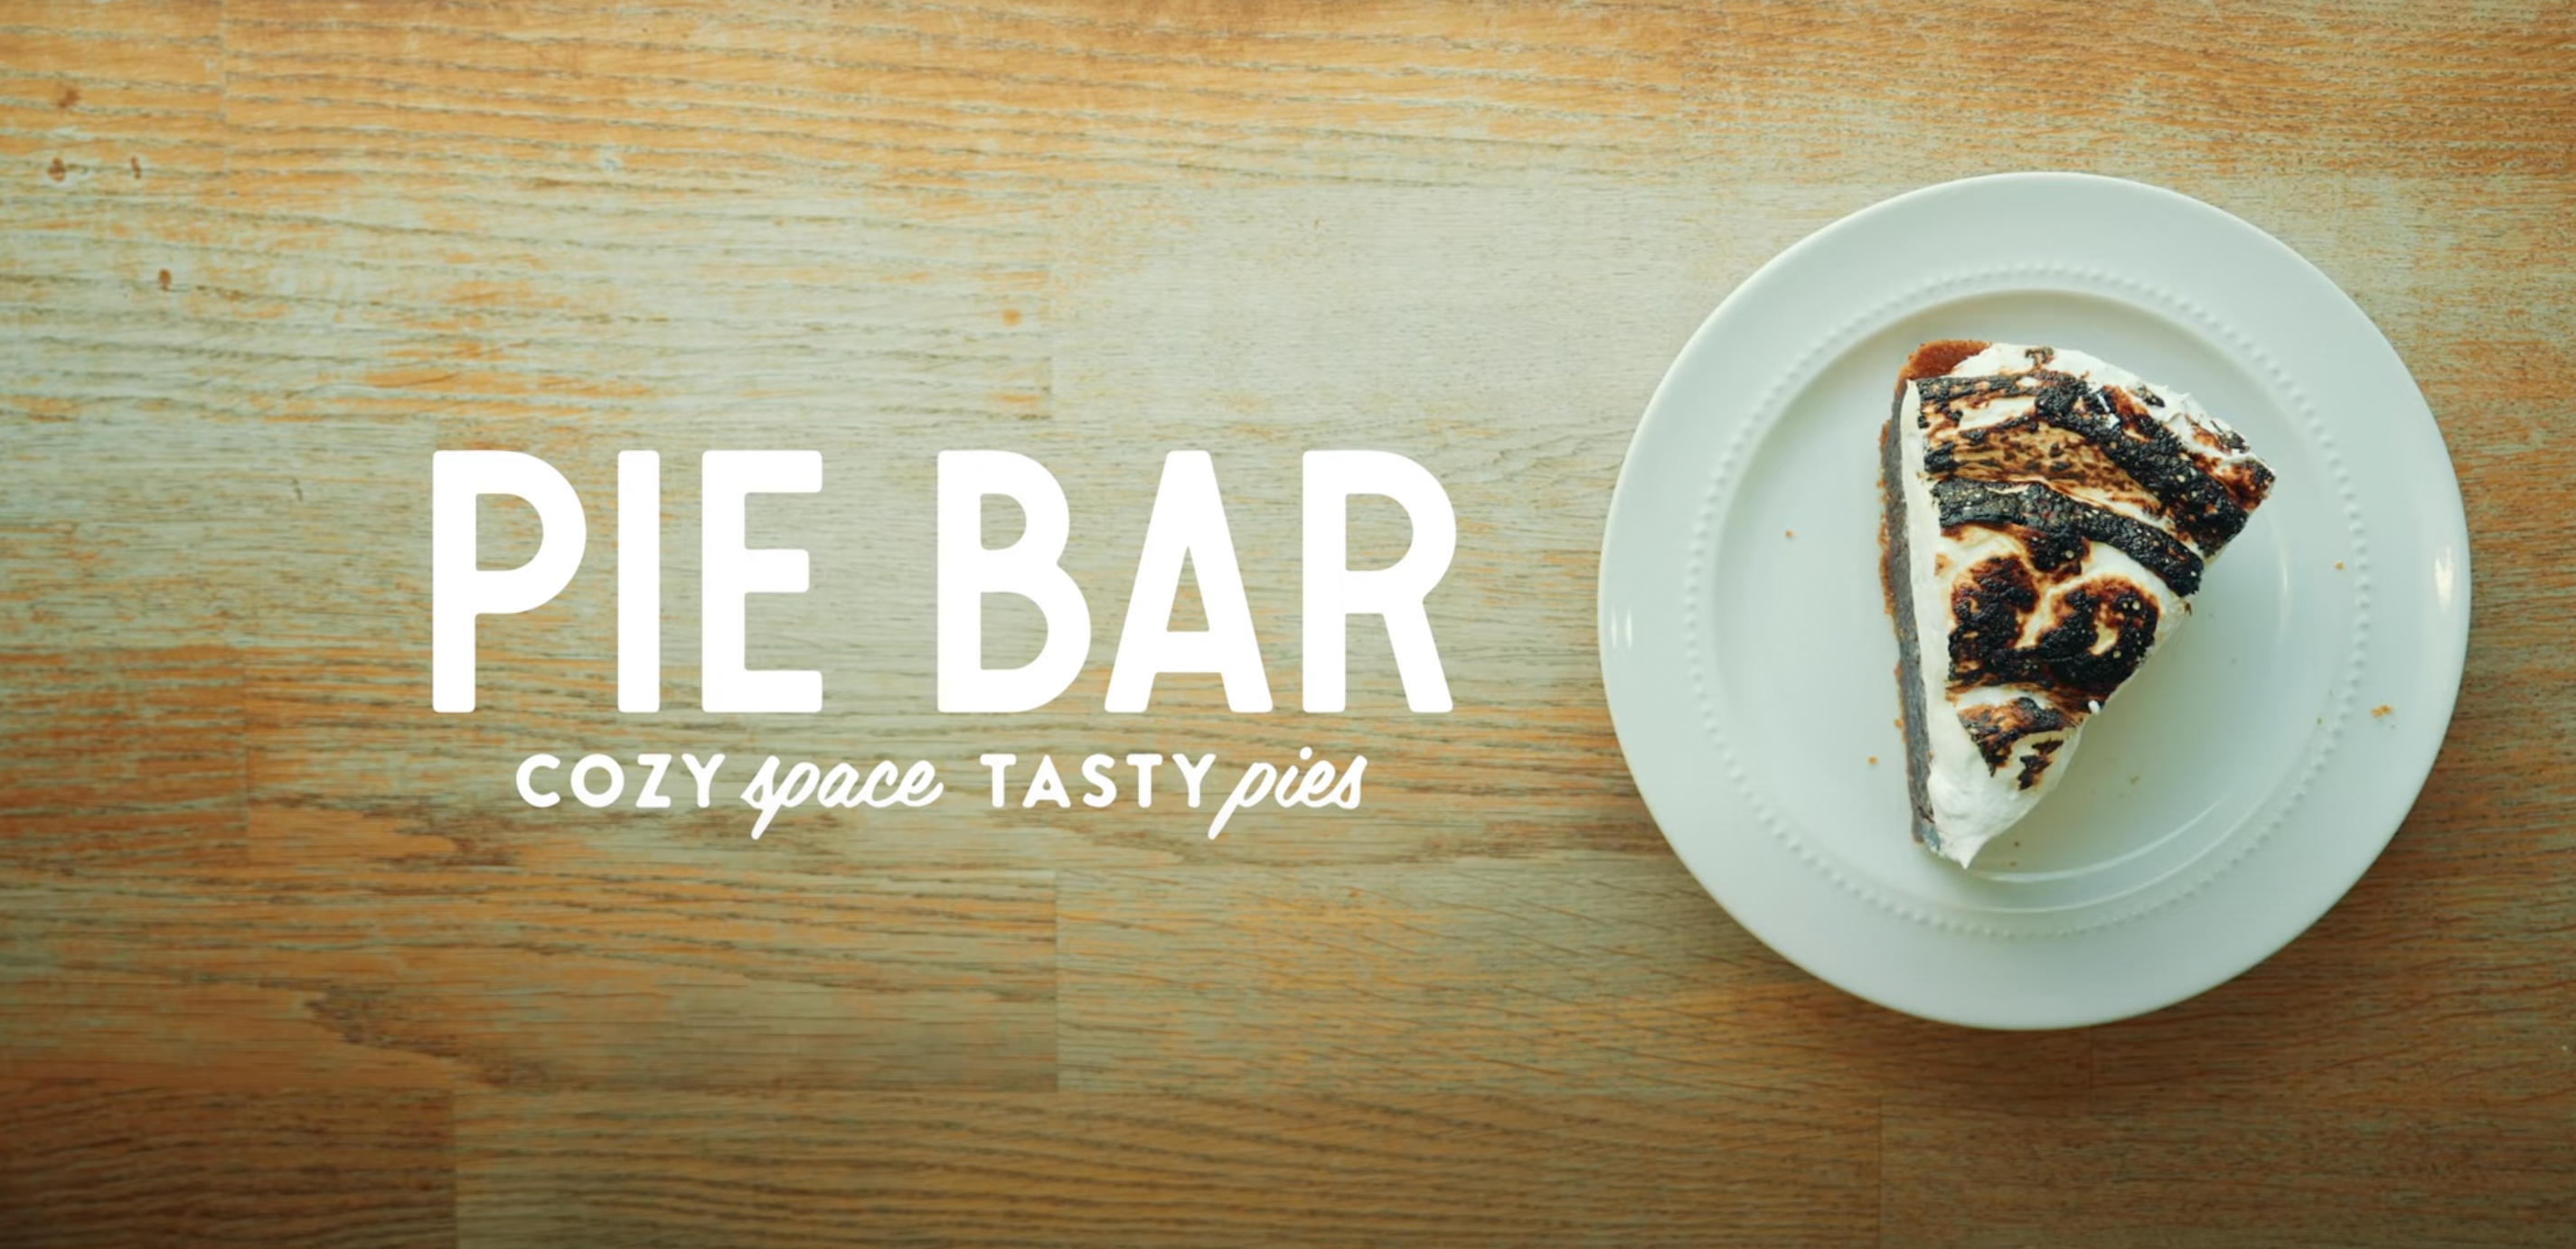 Load video: A Video Showcasing a Day in the Life of Pie Bar